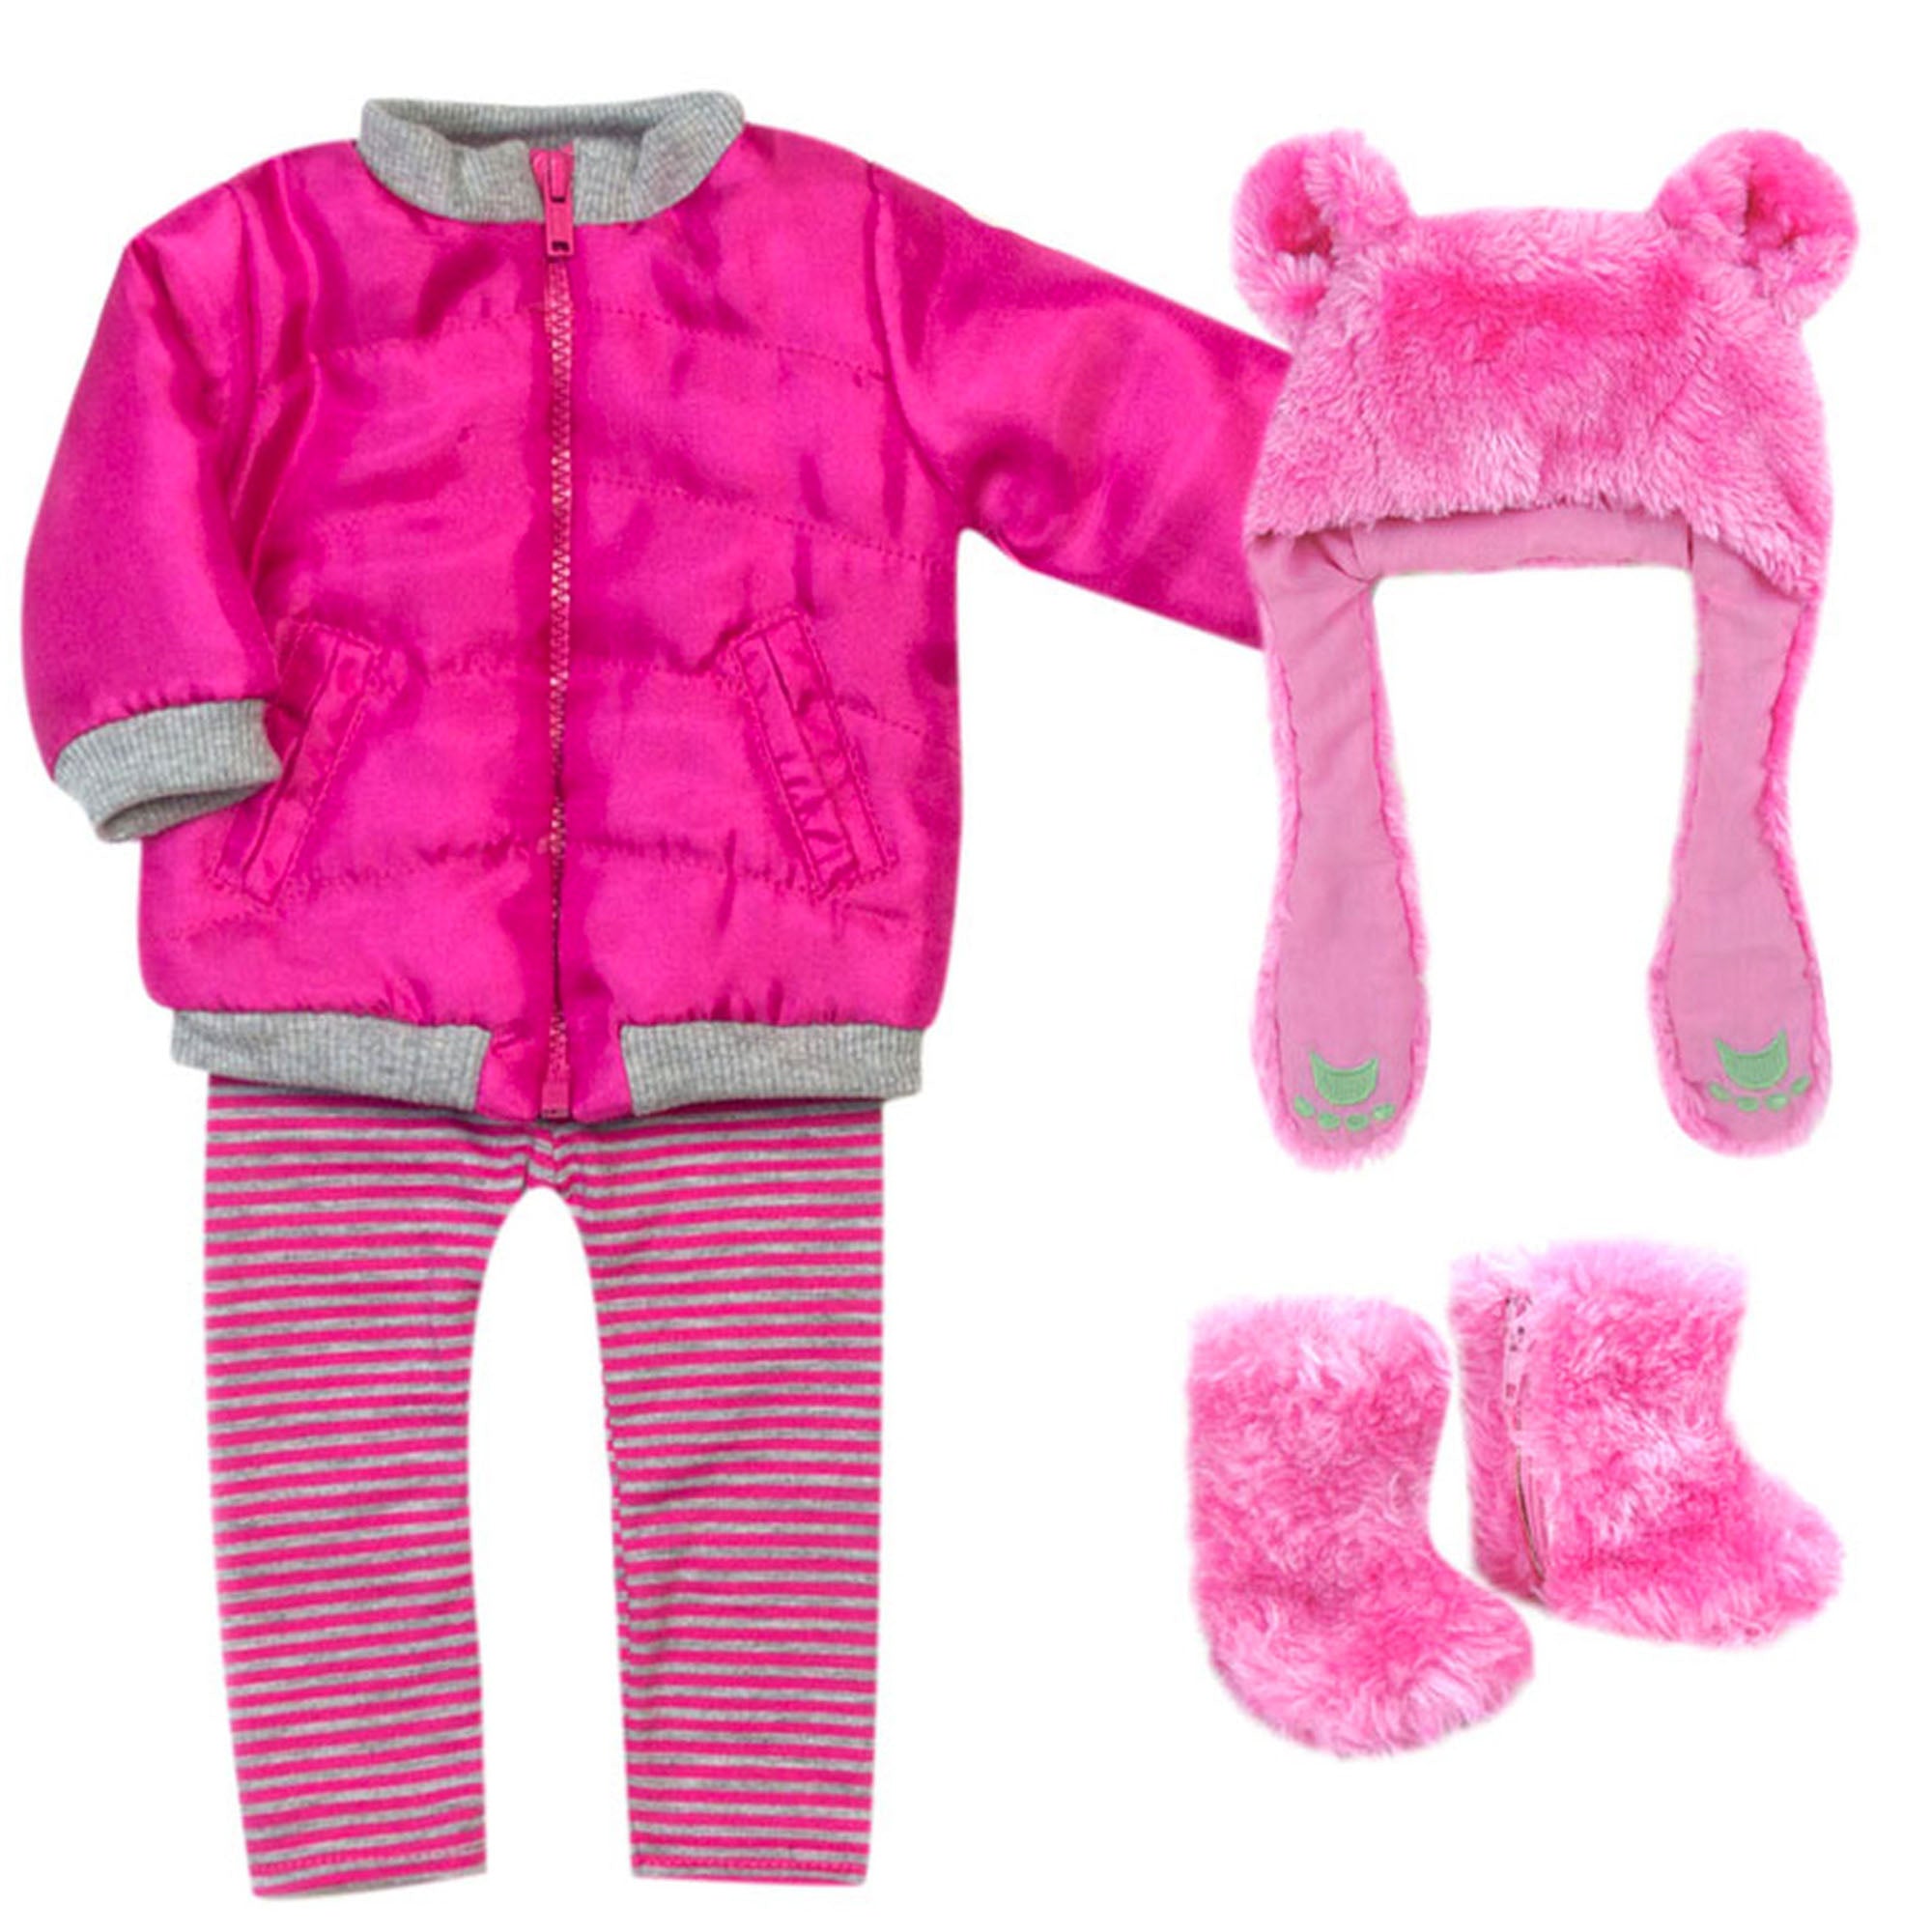 Sophia's 4 Piece Winter Outfit with Bear Fur Hat Set for 18'' Dolls, Hot Pink